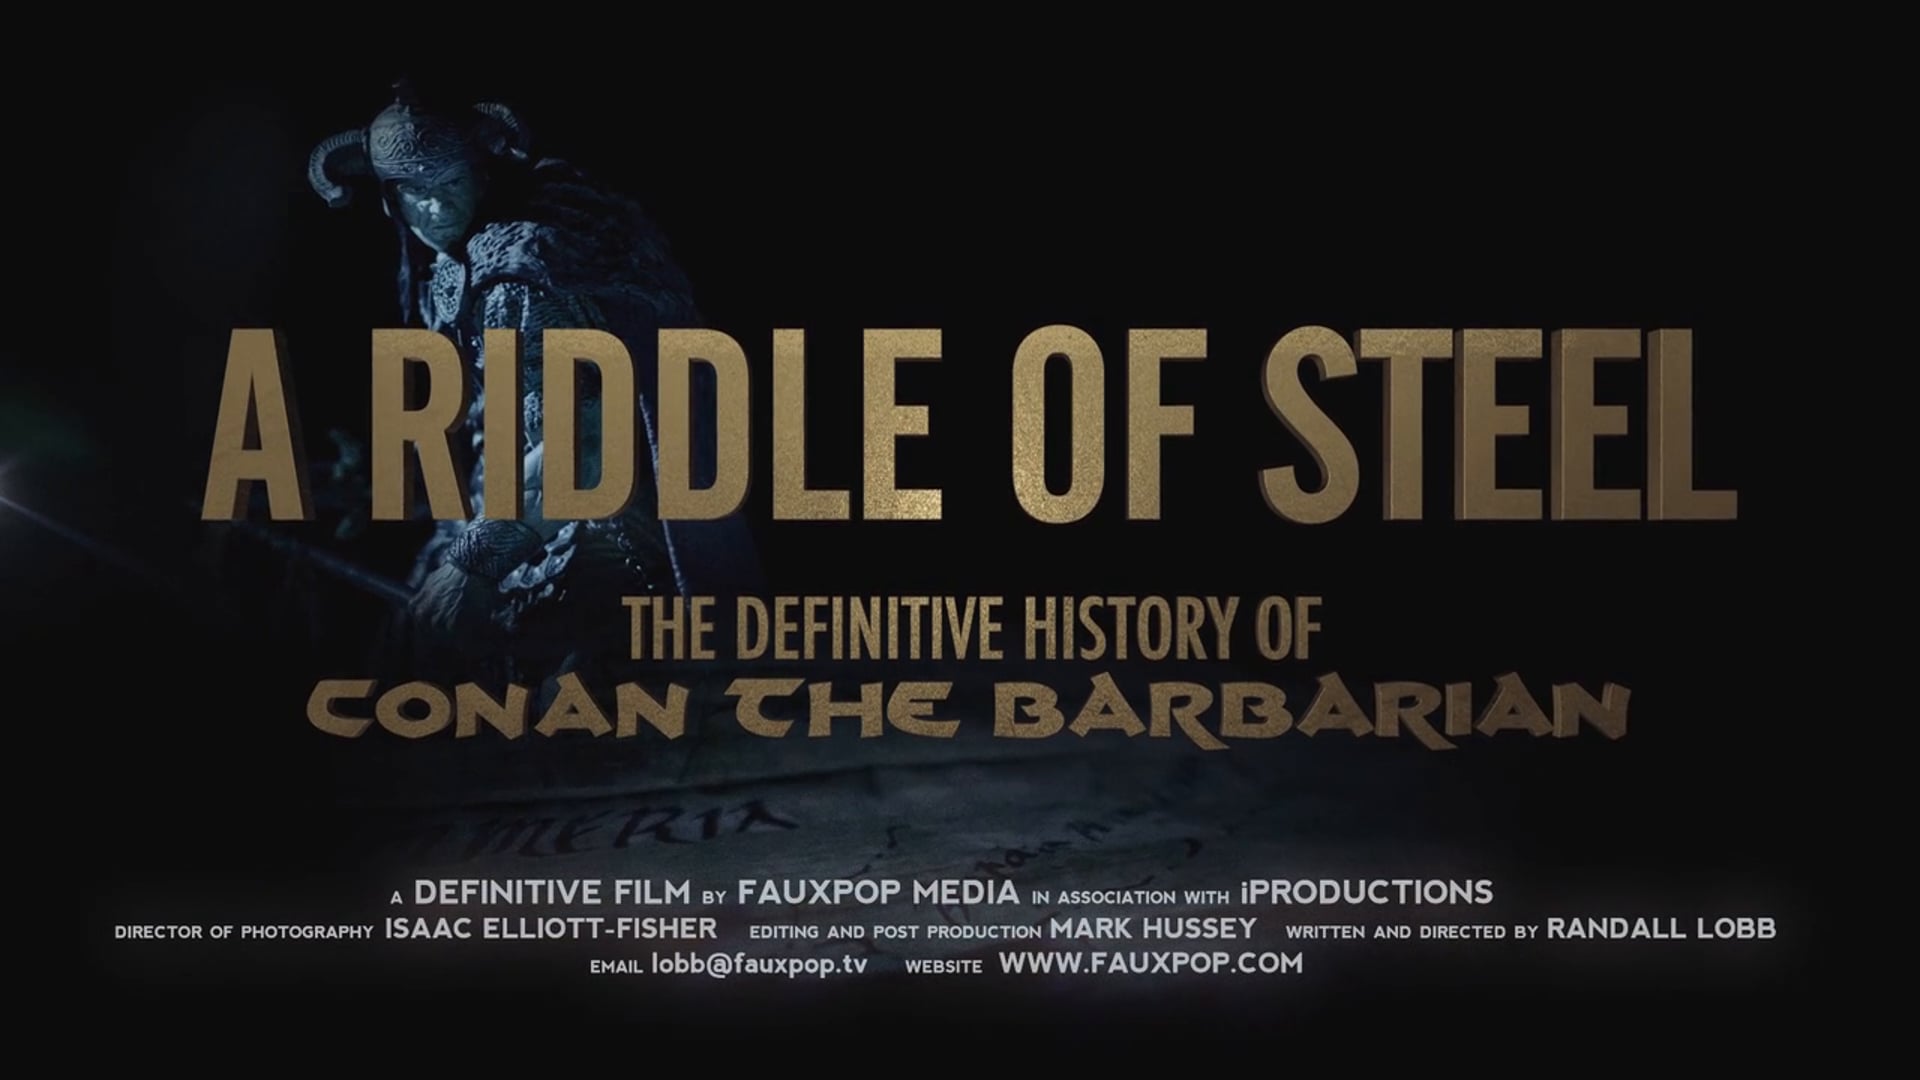 A Riddle Of Steel: The Definitive History of Conan the Barbarian ( Process Teaser )